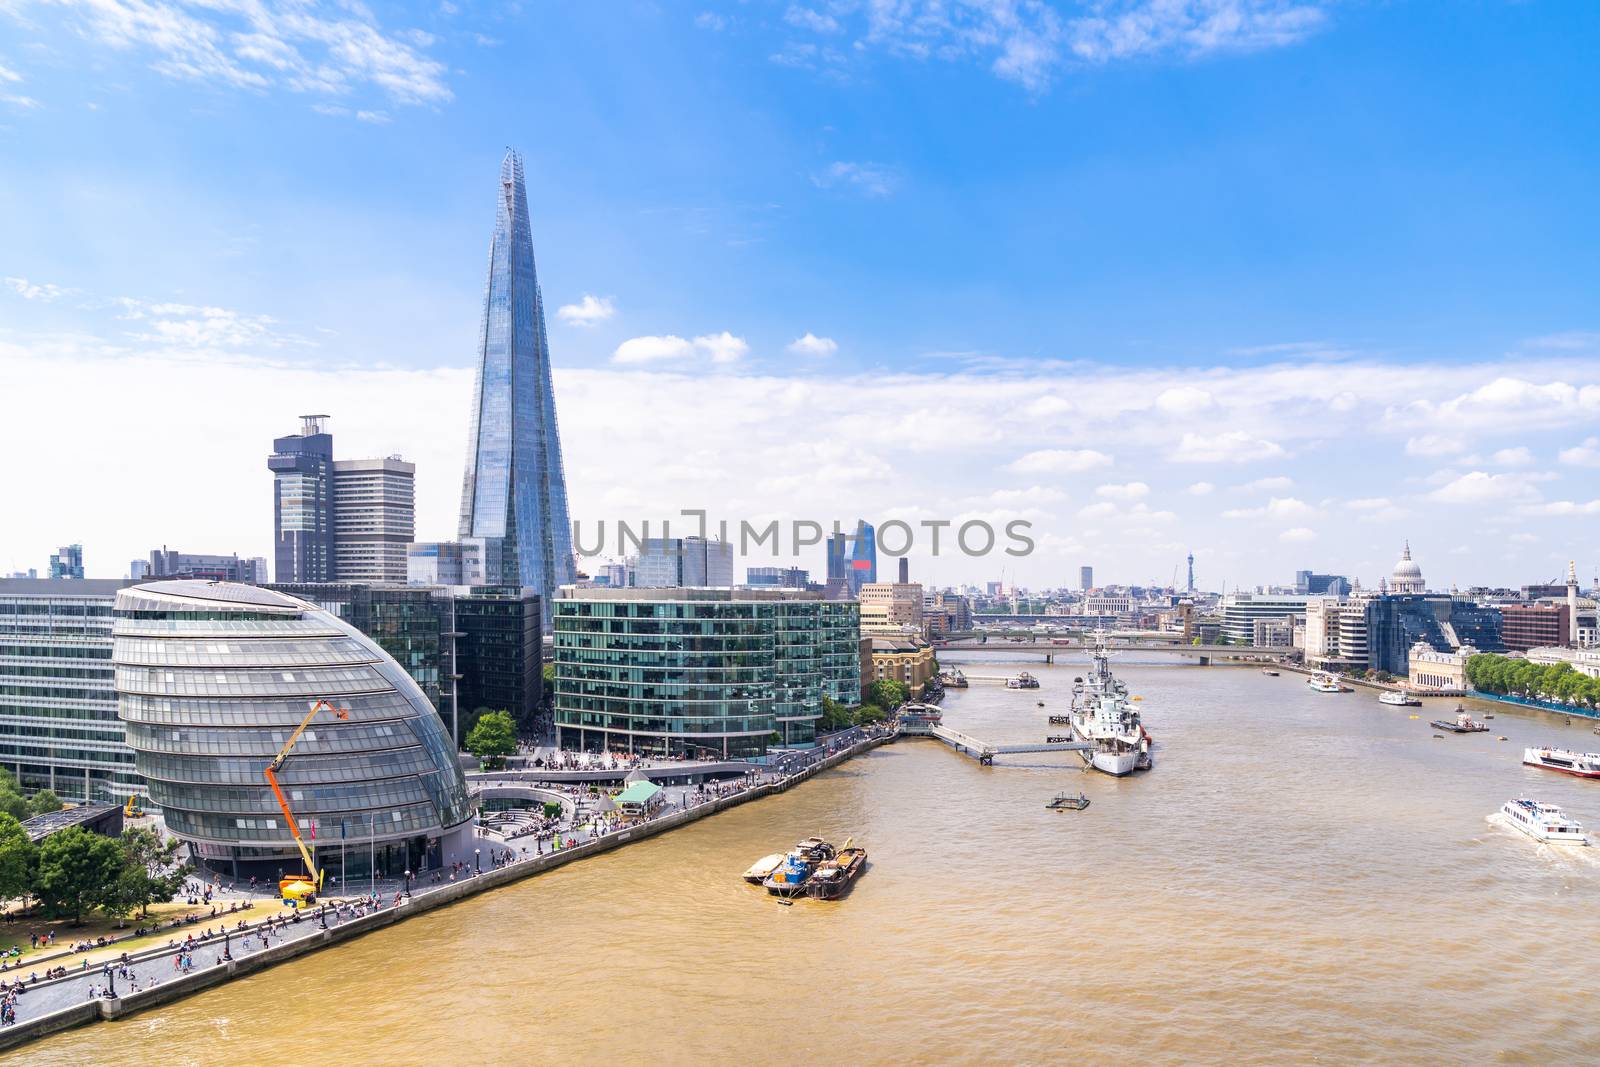 London downtown cityscape skylines building with River Thames in London UK